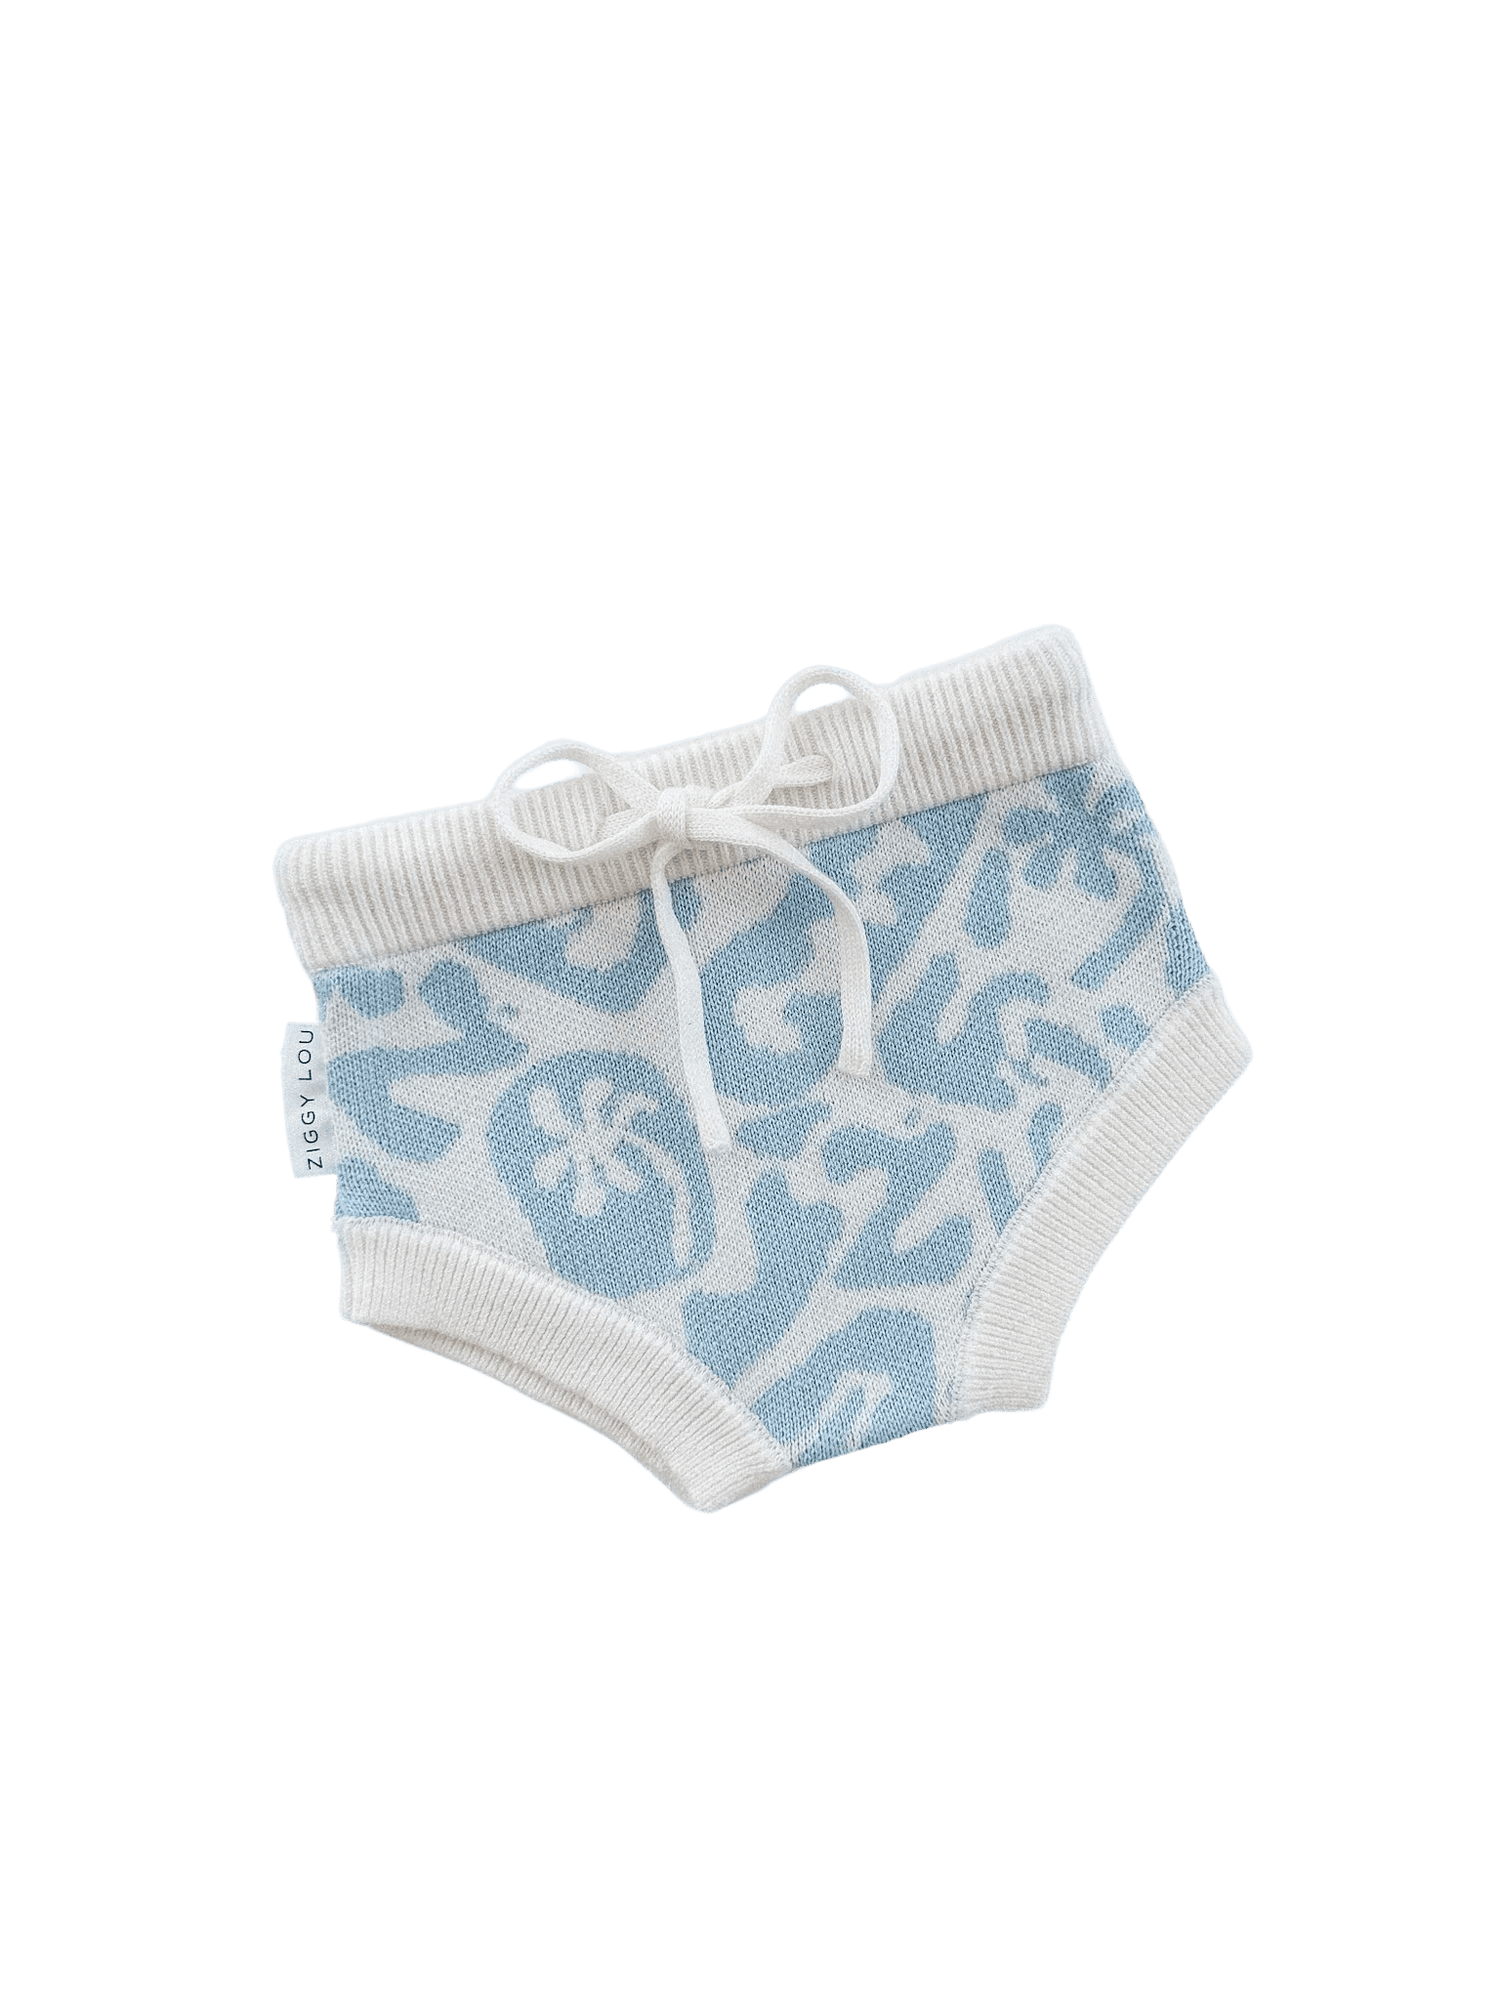 ZIGGY LOU | BLOOMERS - RIO 0-3M by ZIGGY LOU - The Playful Collective